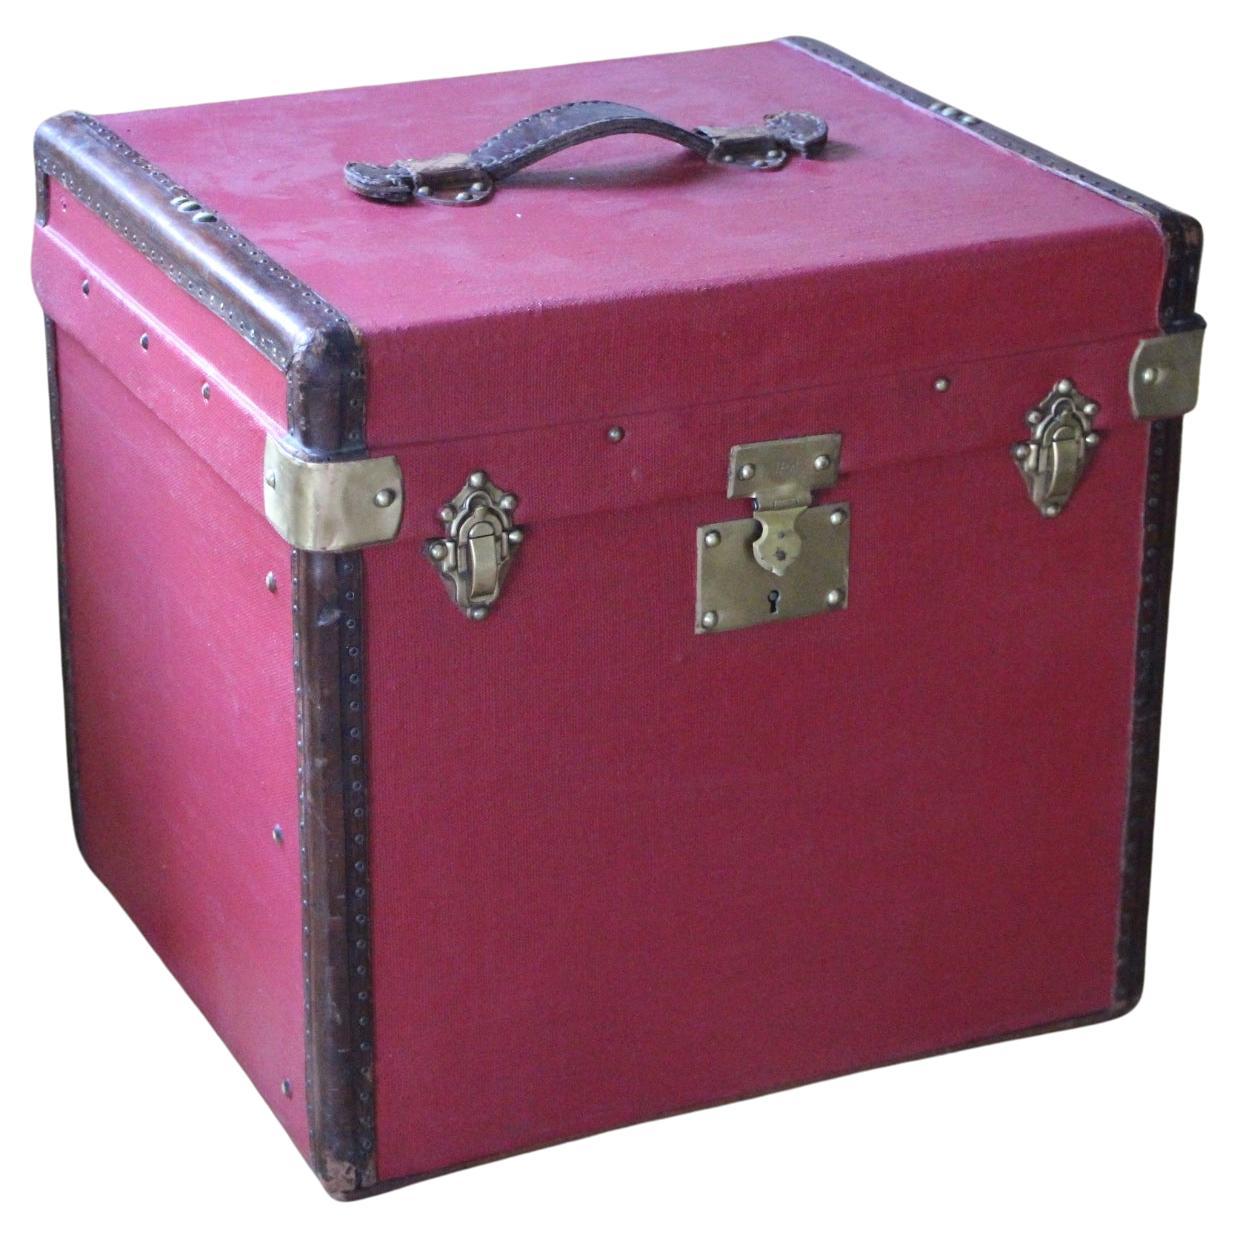 1930s Red Canvas "Cube Shape" Hat Trunk, Steamer Trunk, Travel Trunk